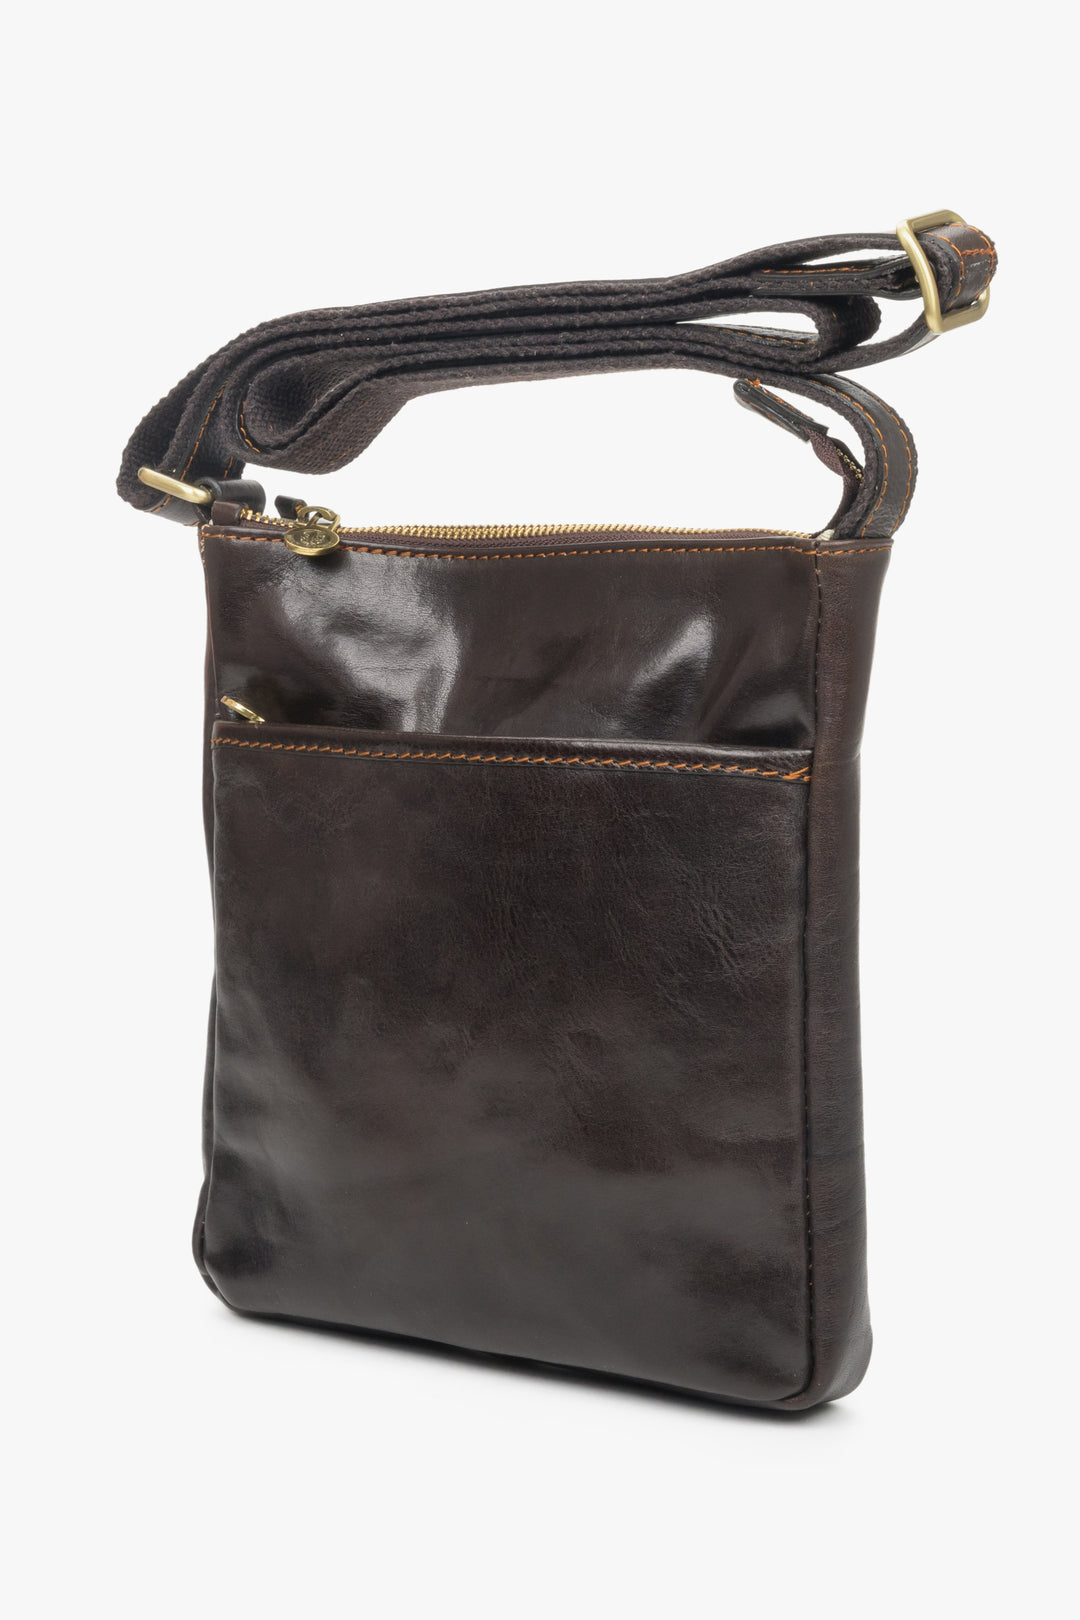 Men's bag made of genuine brown leather - side view.